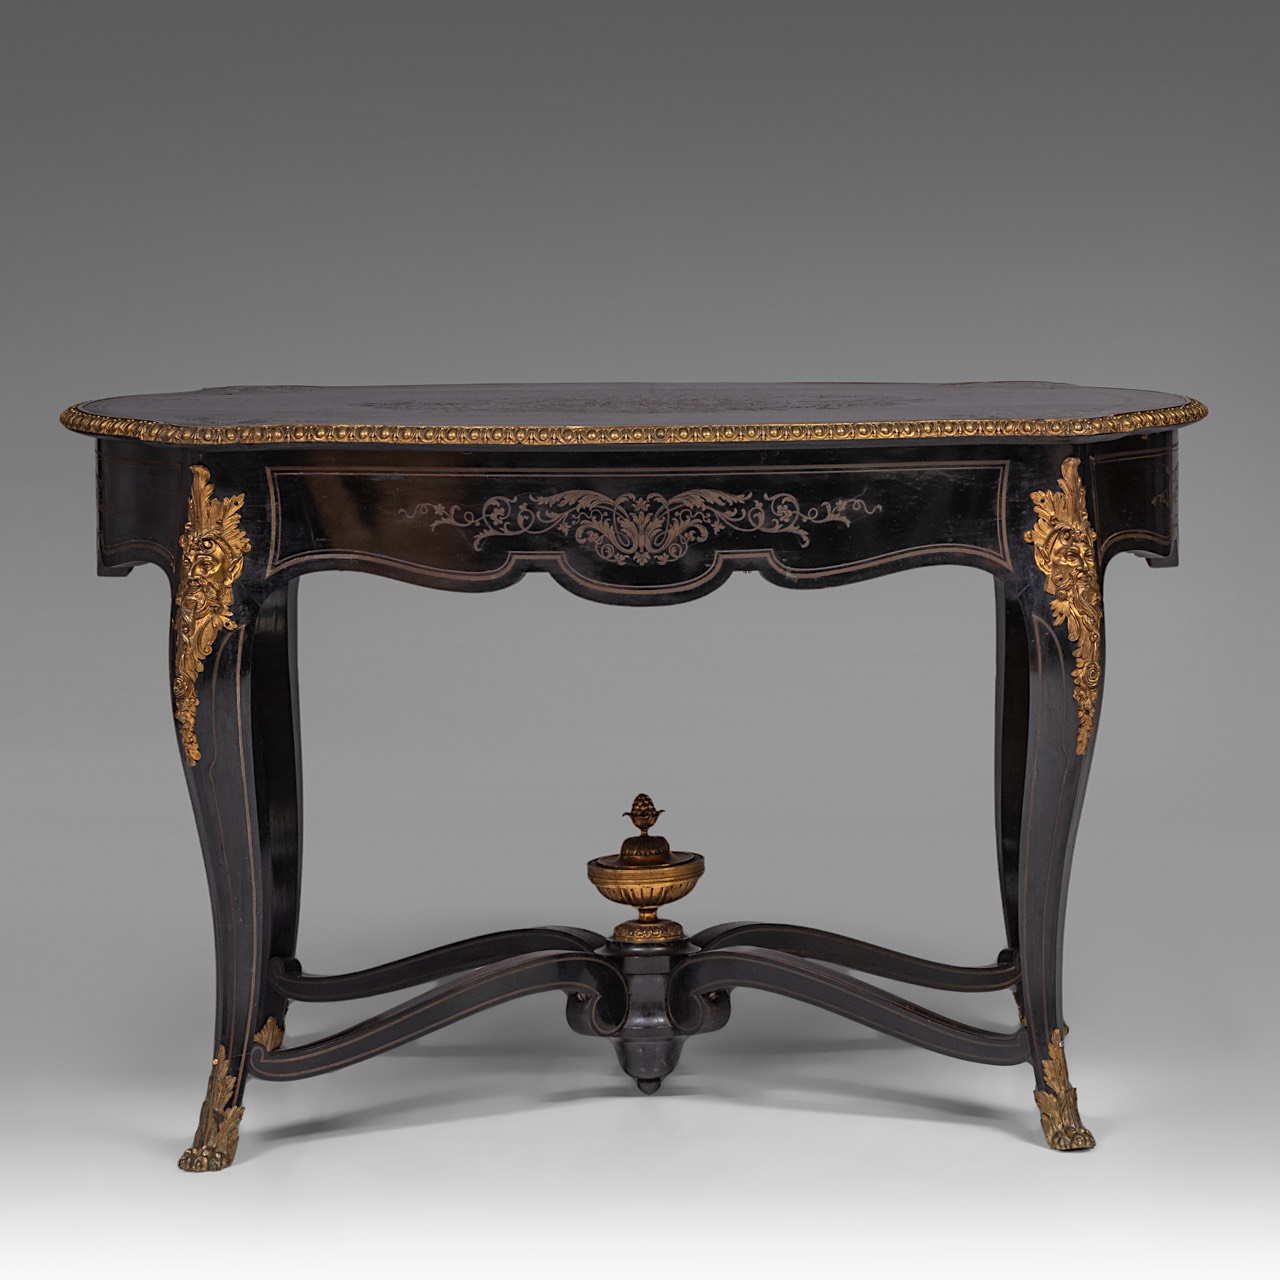 A Napoleon III (1852-1870) Boulle centre table, stamped 'HPR' Henri Picard (1840-1890), H 75 - W 120 - Image 4 of 10